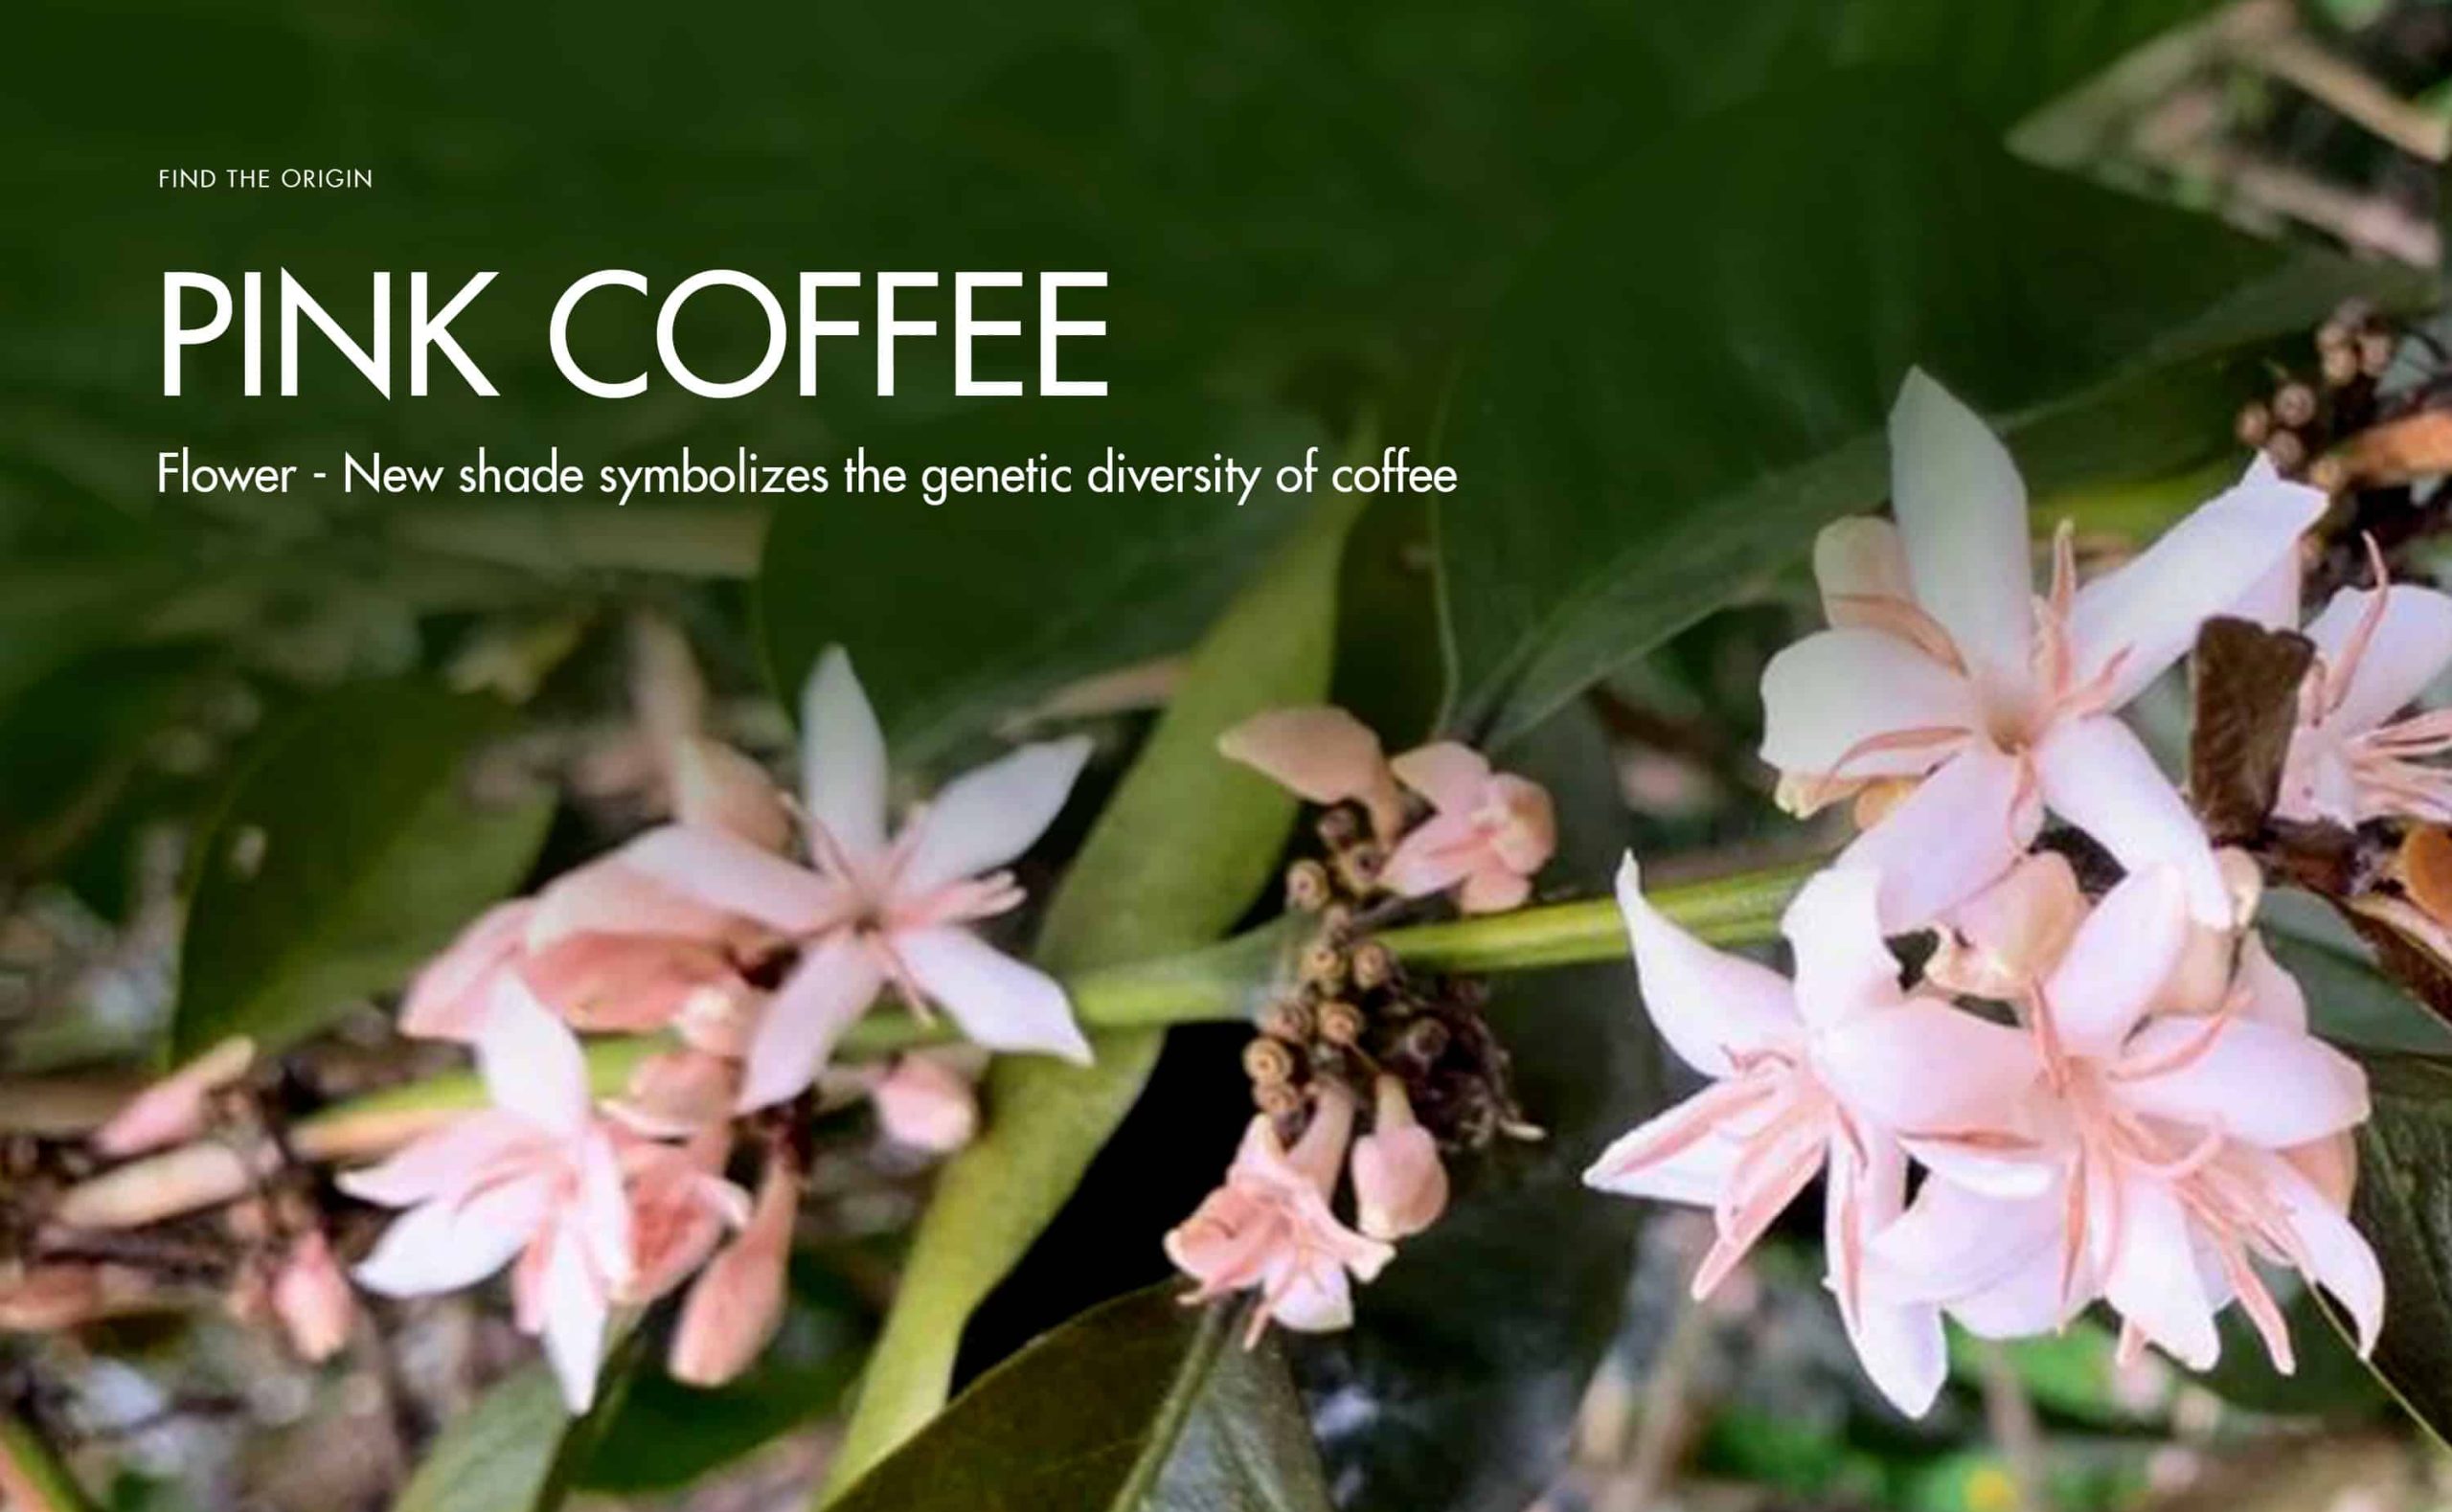 Pink coffee flowers – New shade symbolizing the genetic diversity of coffee